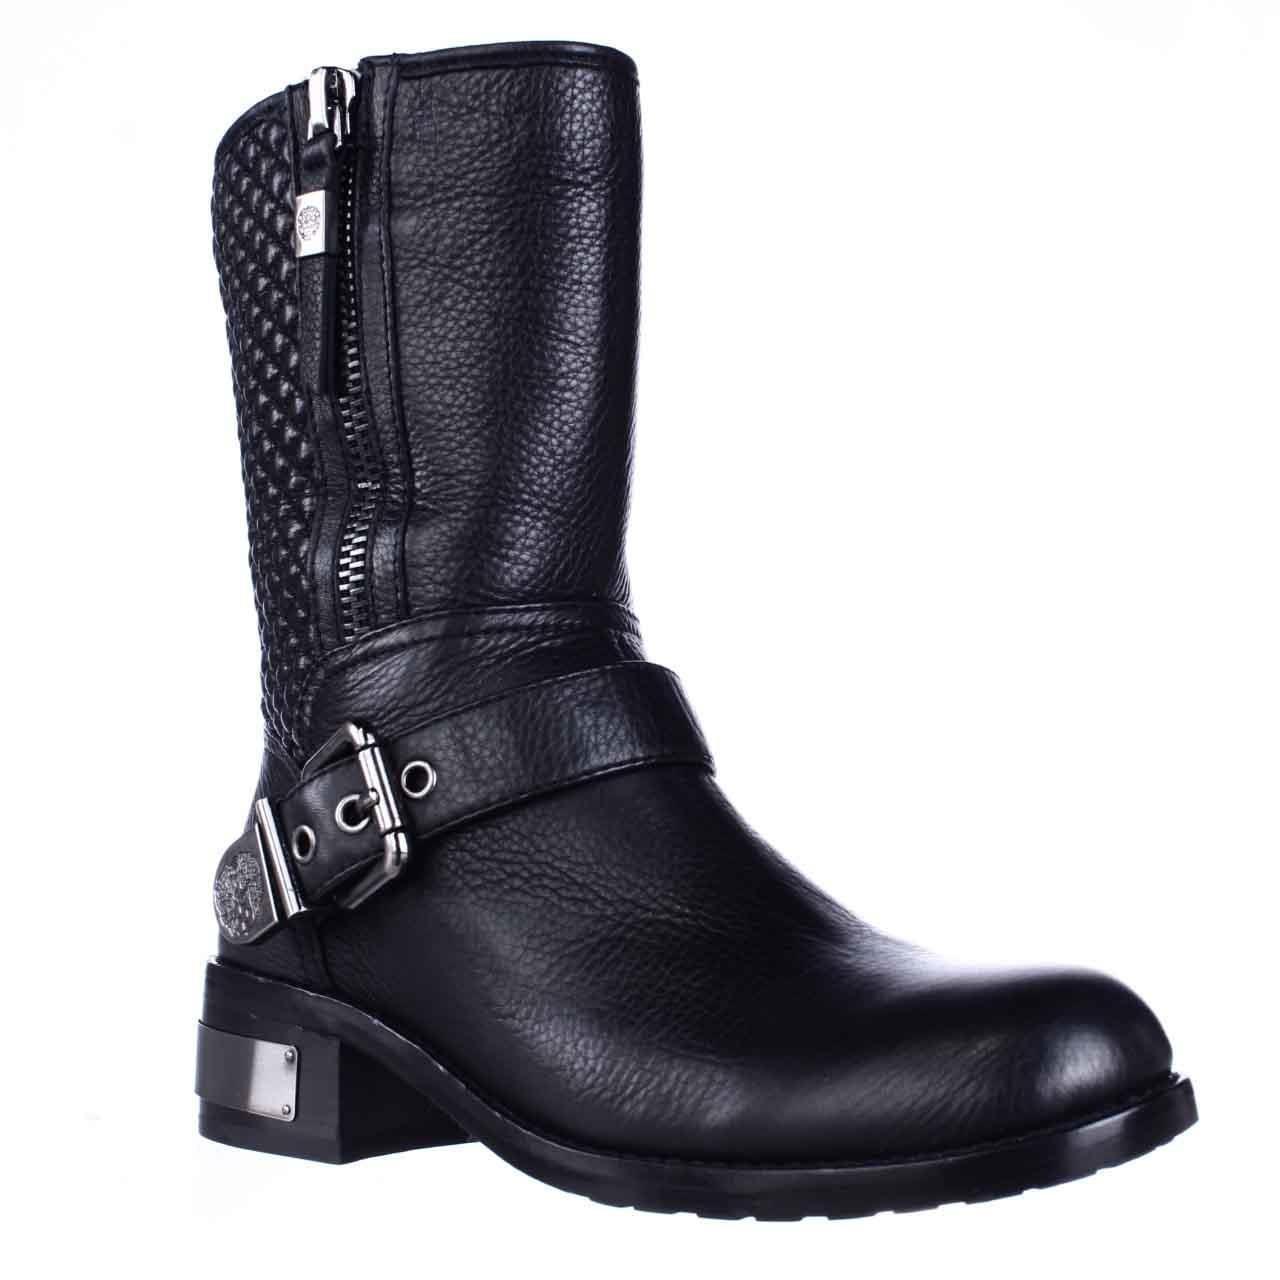 Vince camuto Whynn Midcalf Motorcycle Boots in Black Lyst